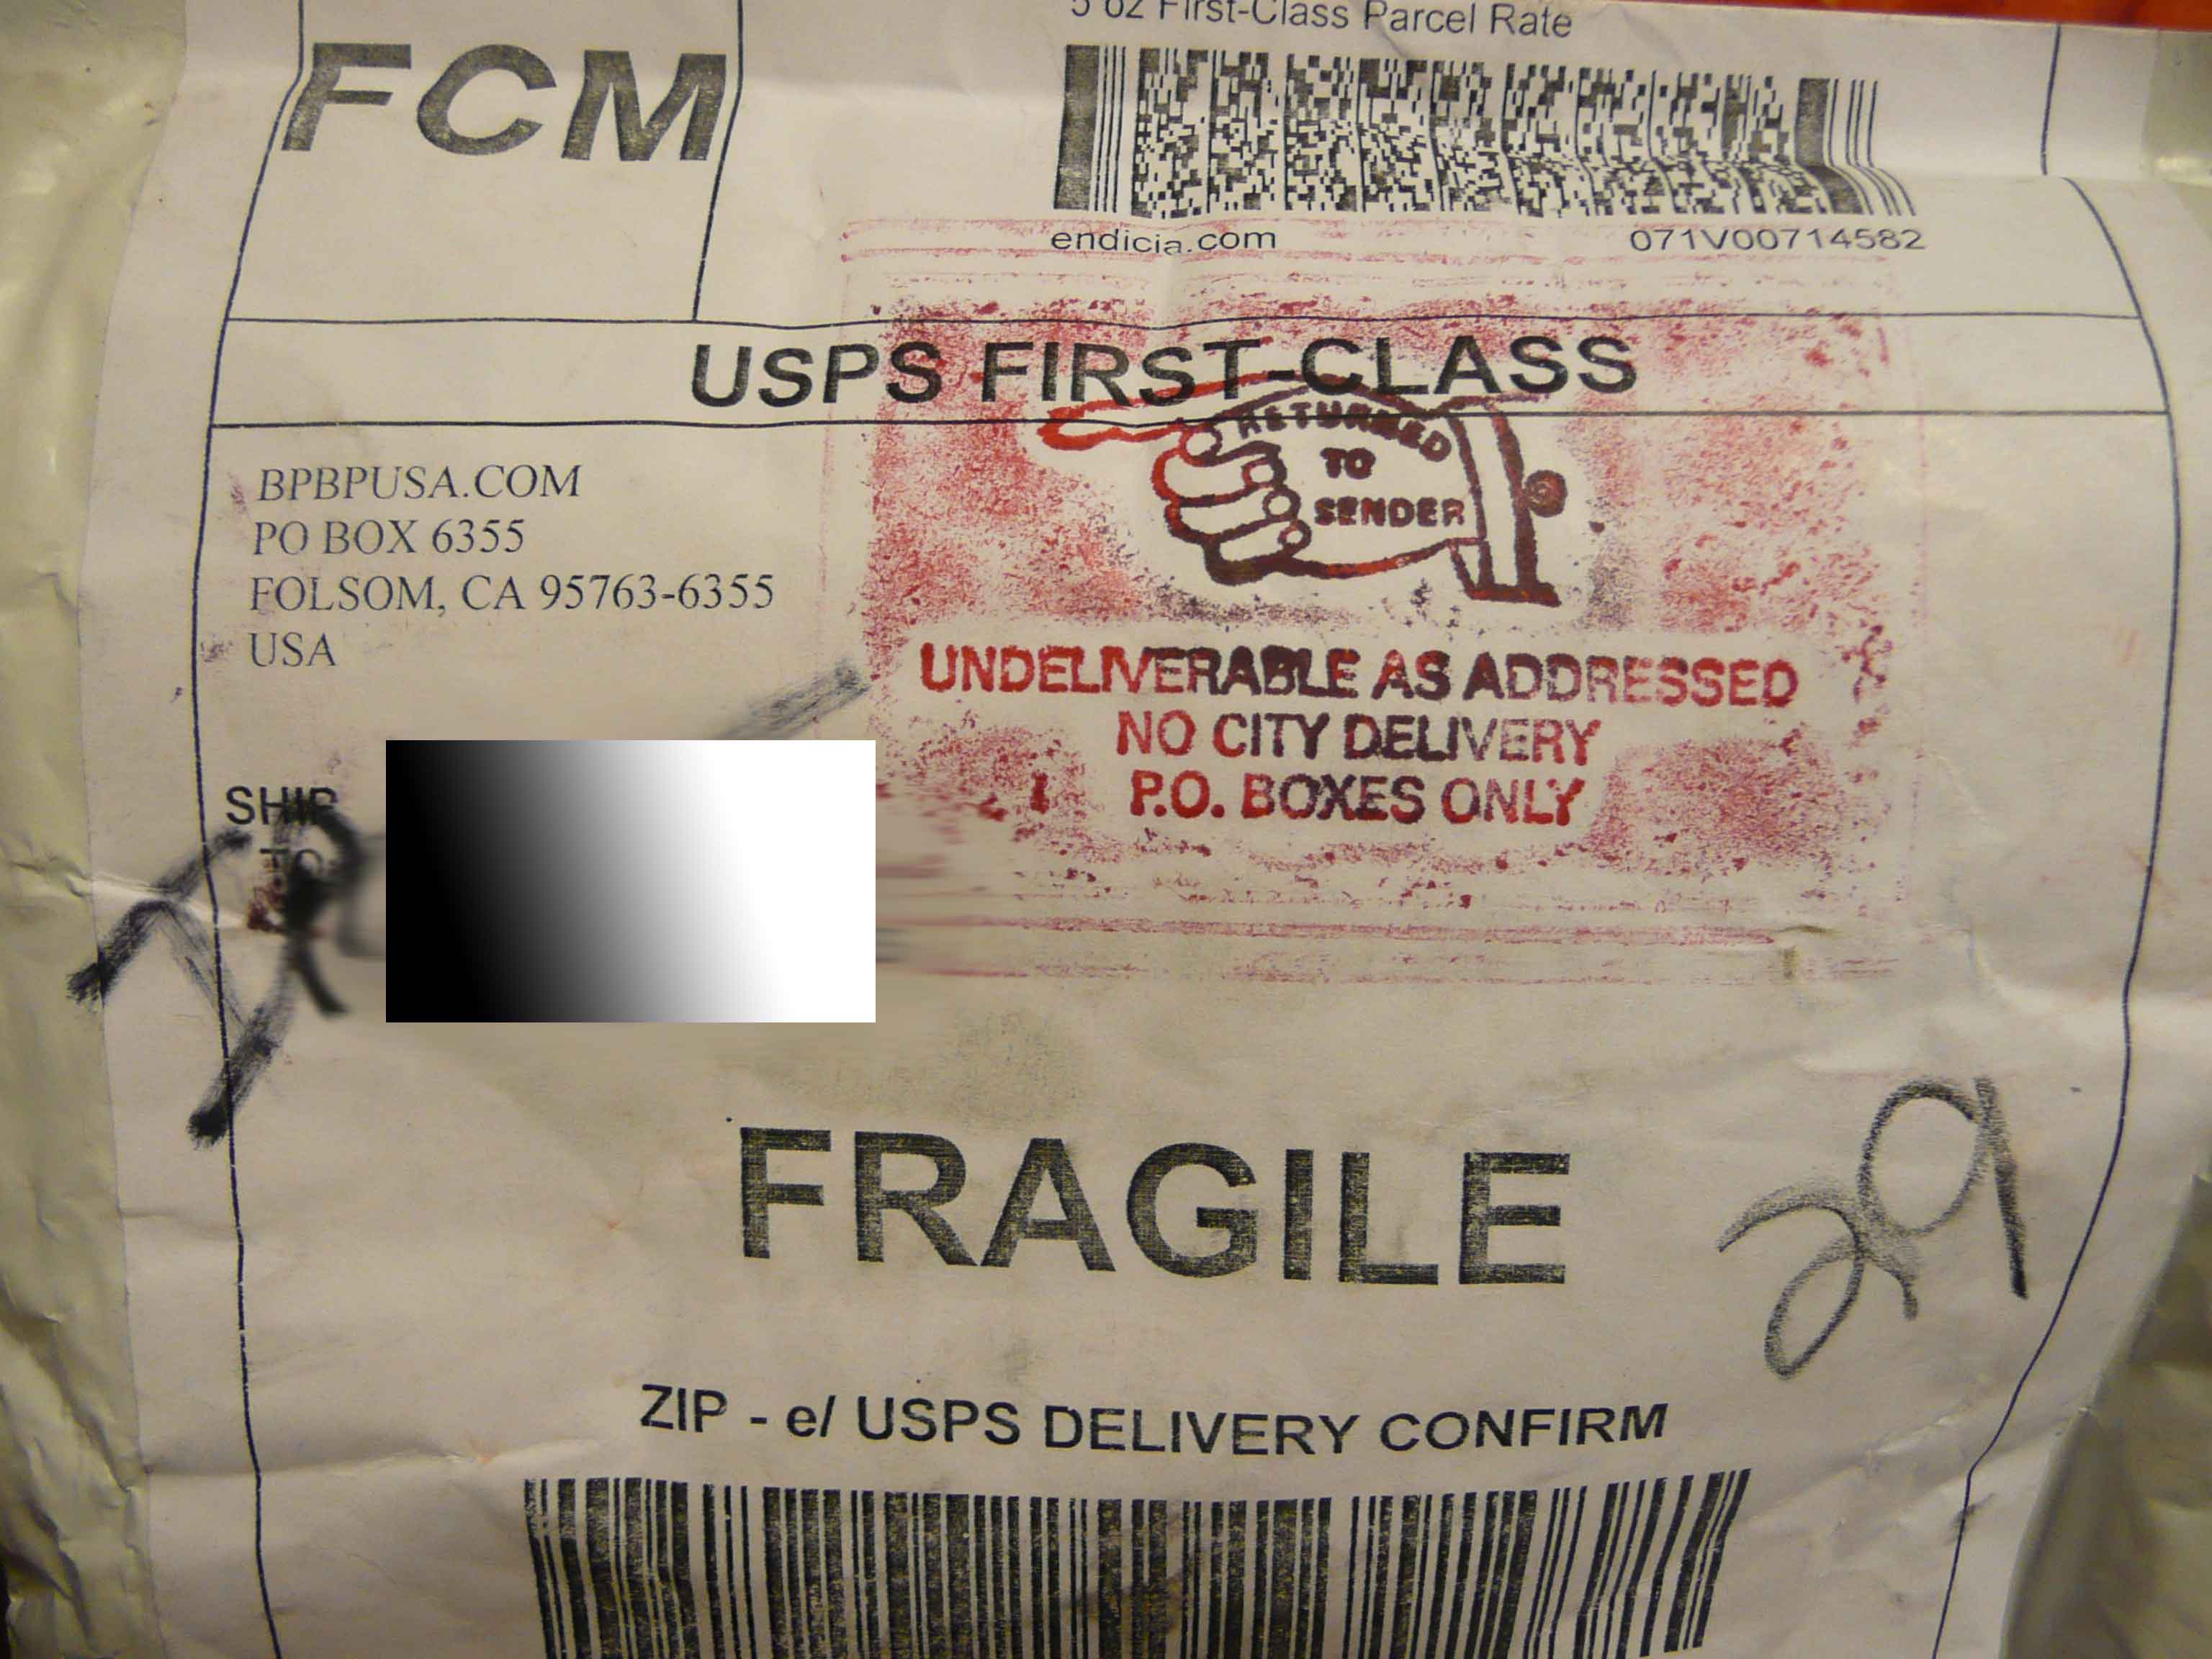 Would you not try to contact the customer and make things right if you received this package back?